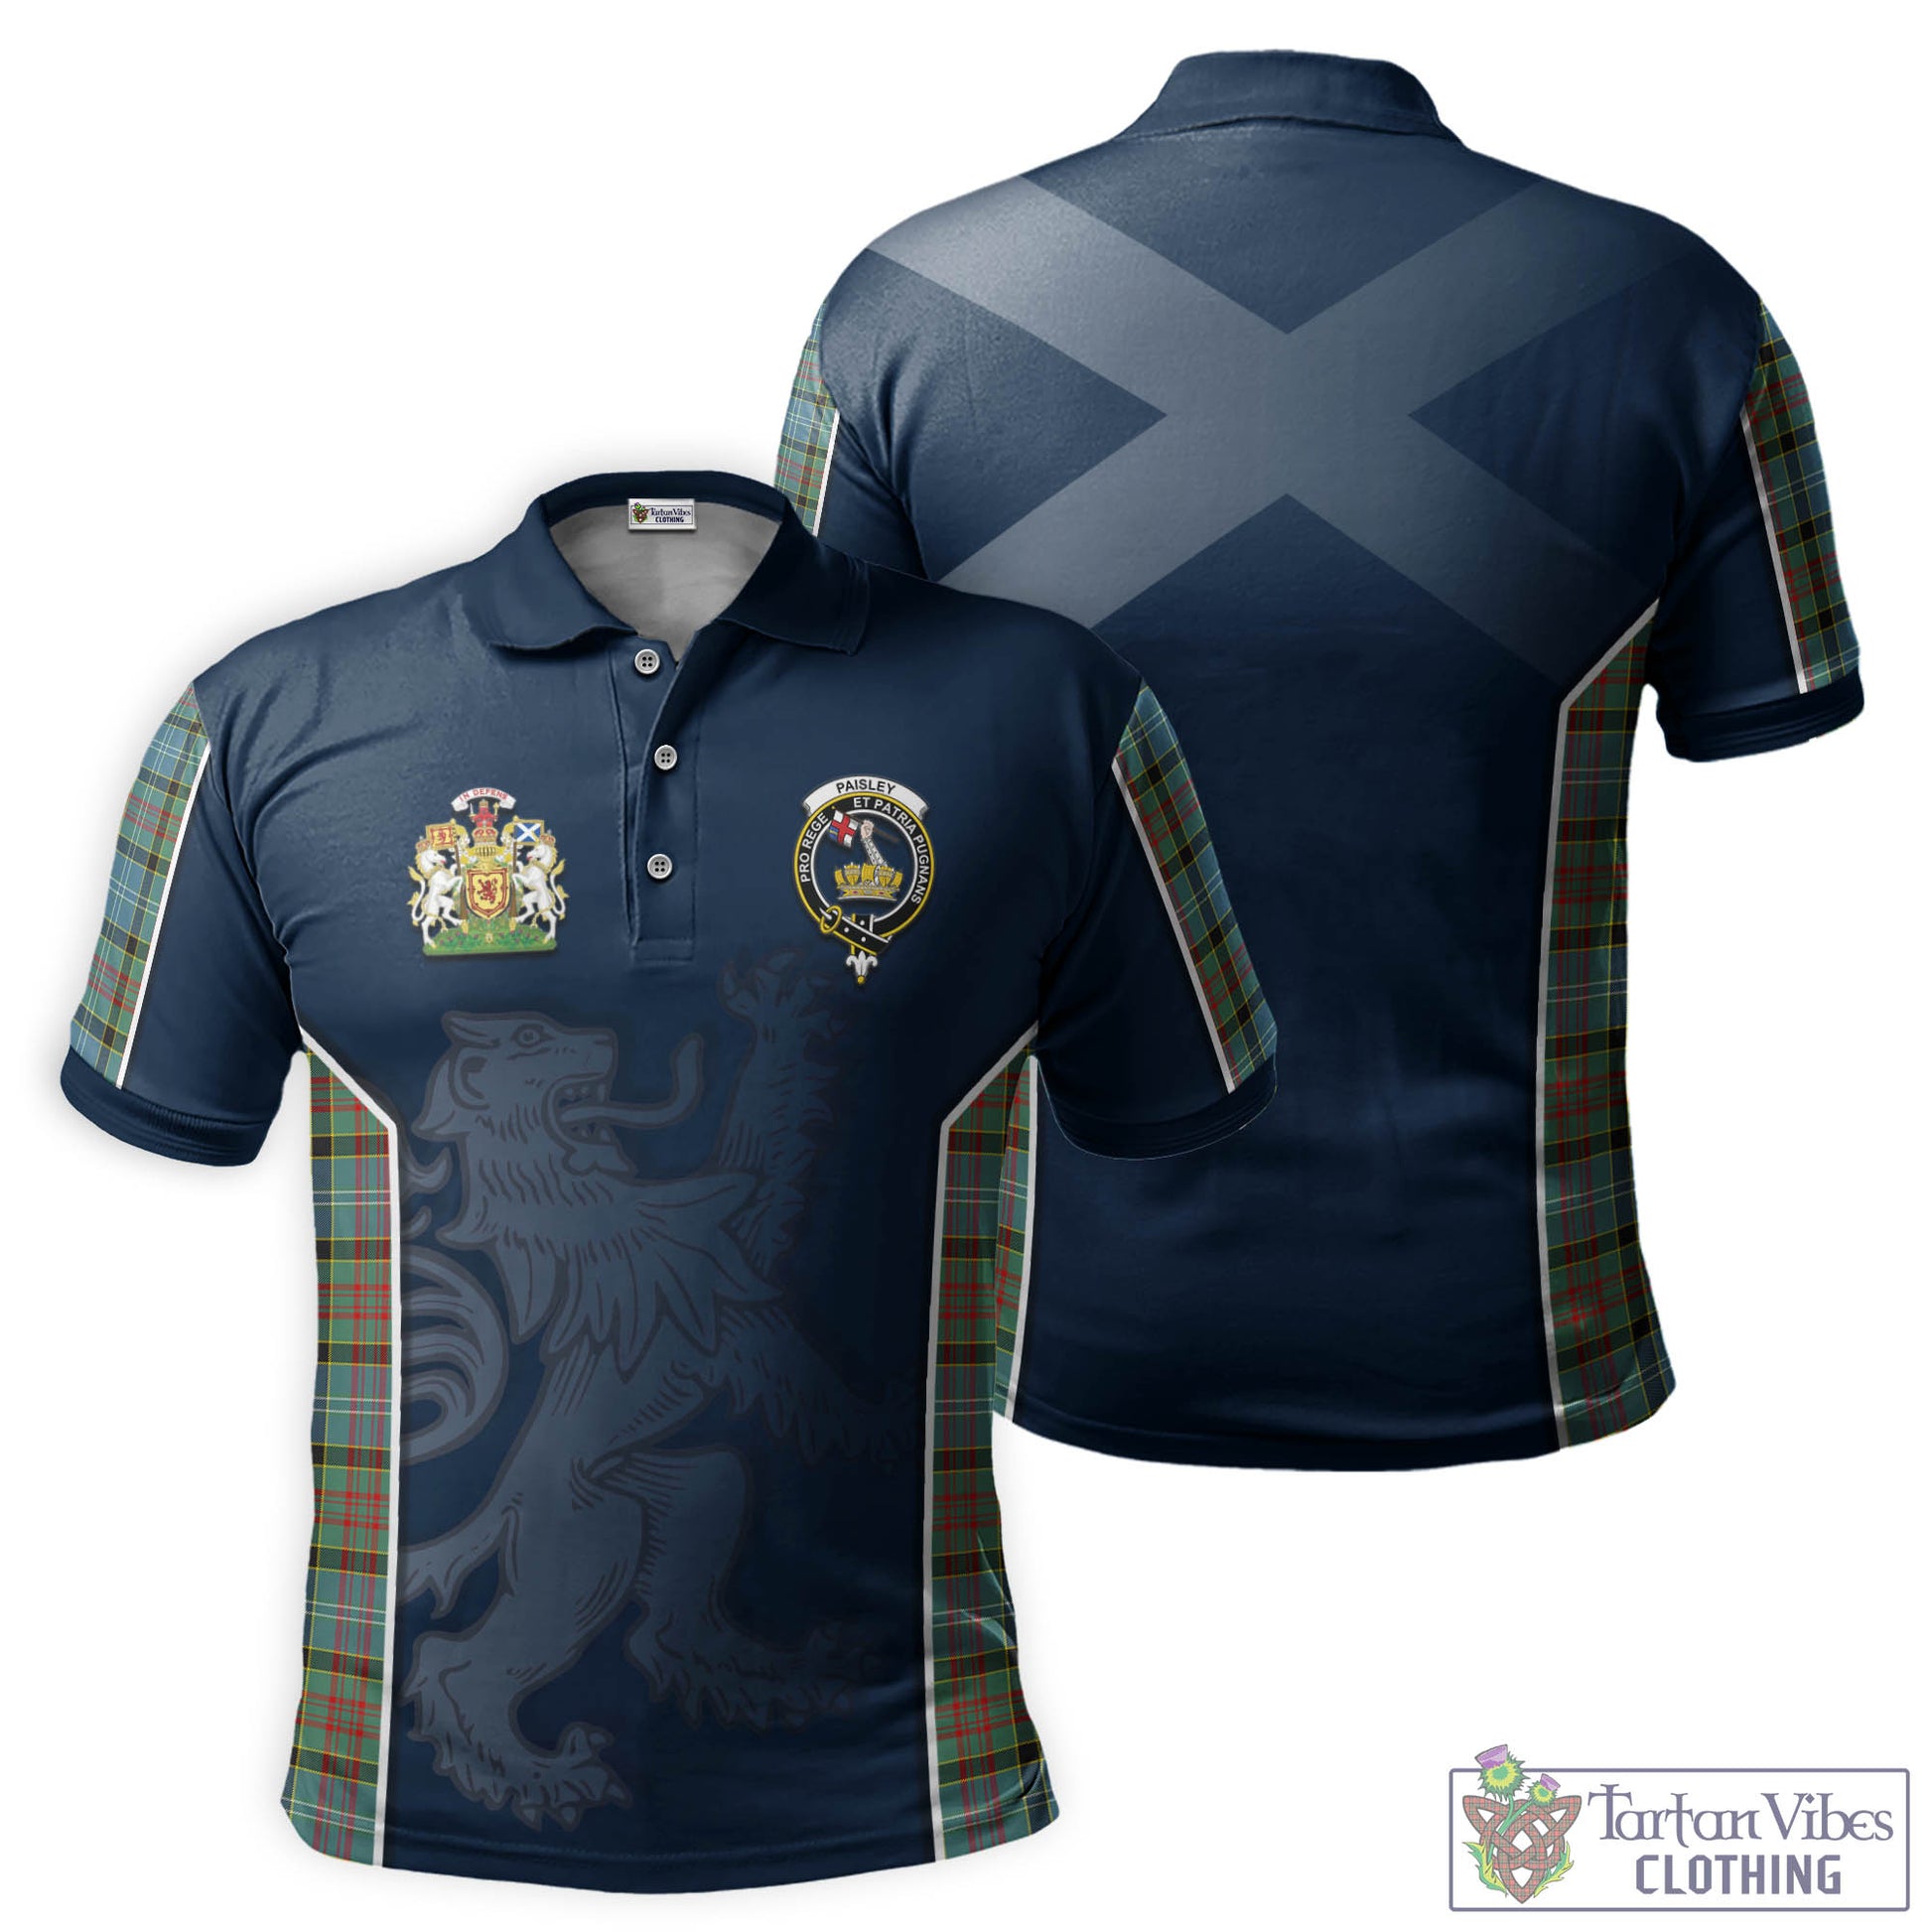 Tartan Vibes Clothing Paisley Tartan Men's Polo Shirt with Family Crest and Lion Rampant Vibes Sport Style